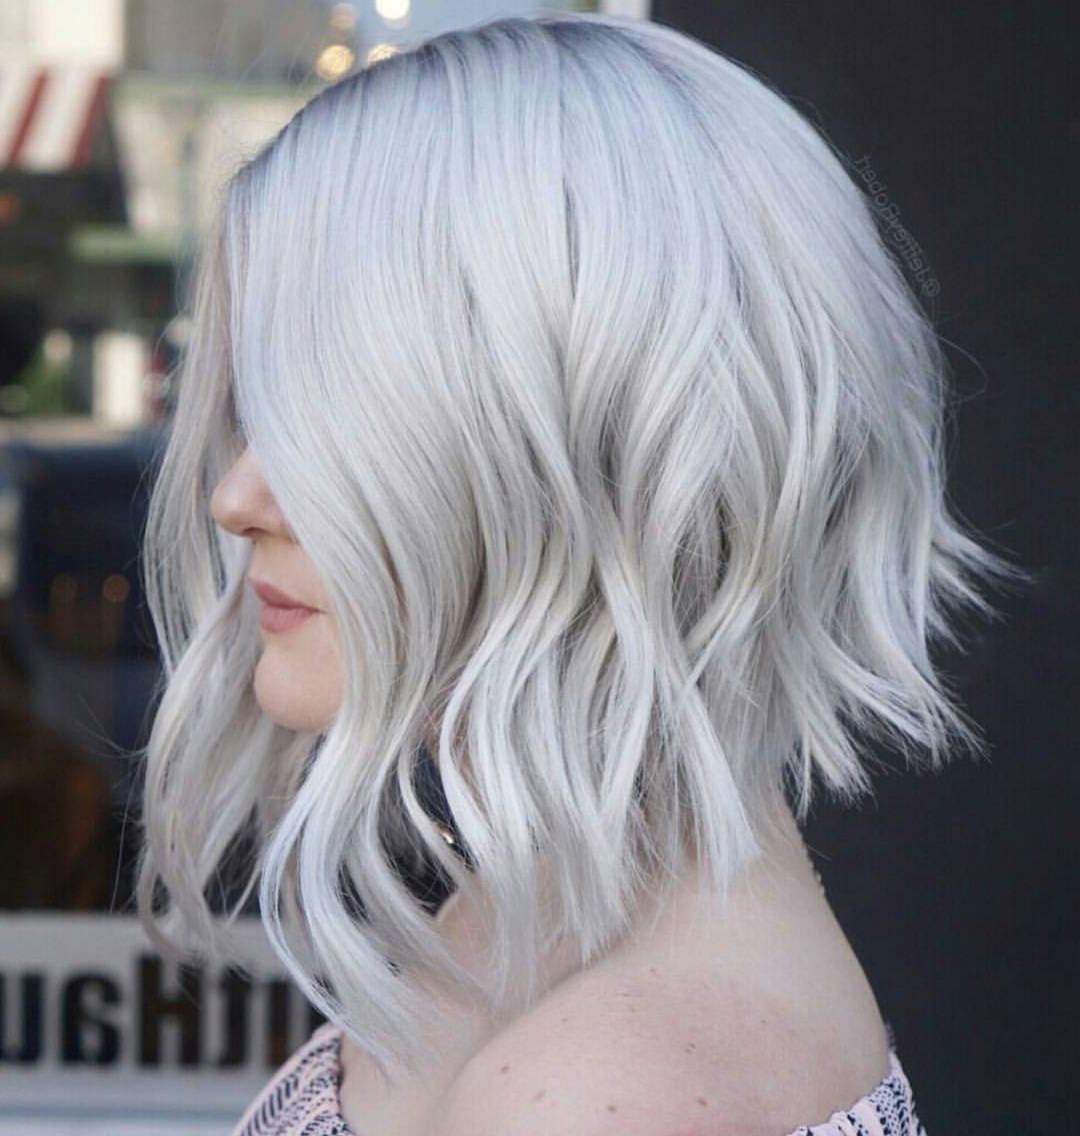 Most Recent Ice Blonde Lob Hairstyles Inside 10 Wavy Lob Hair Styles – Color & Styling Trends Right Now! (View 17 of 20)